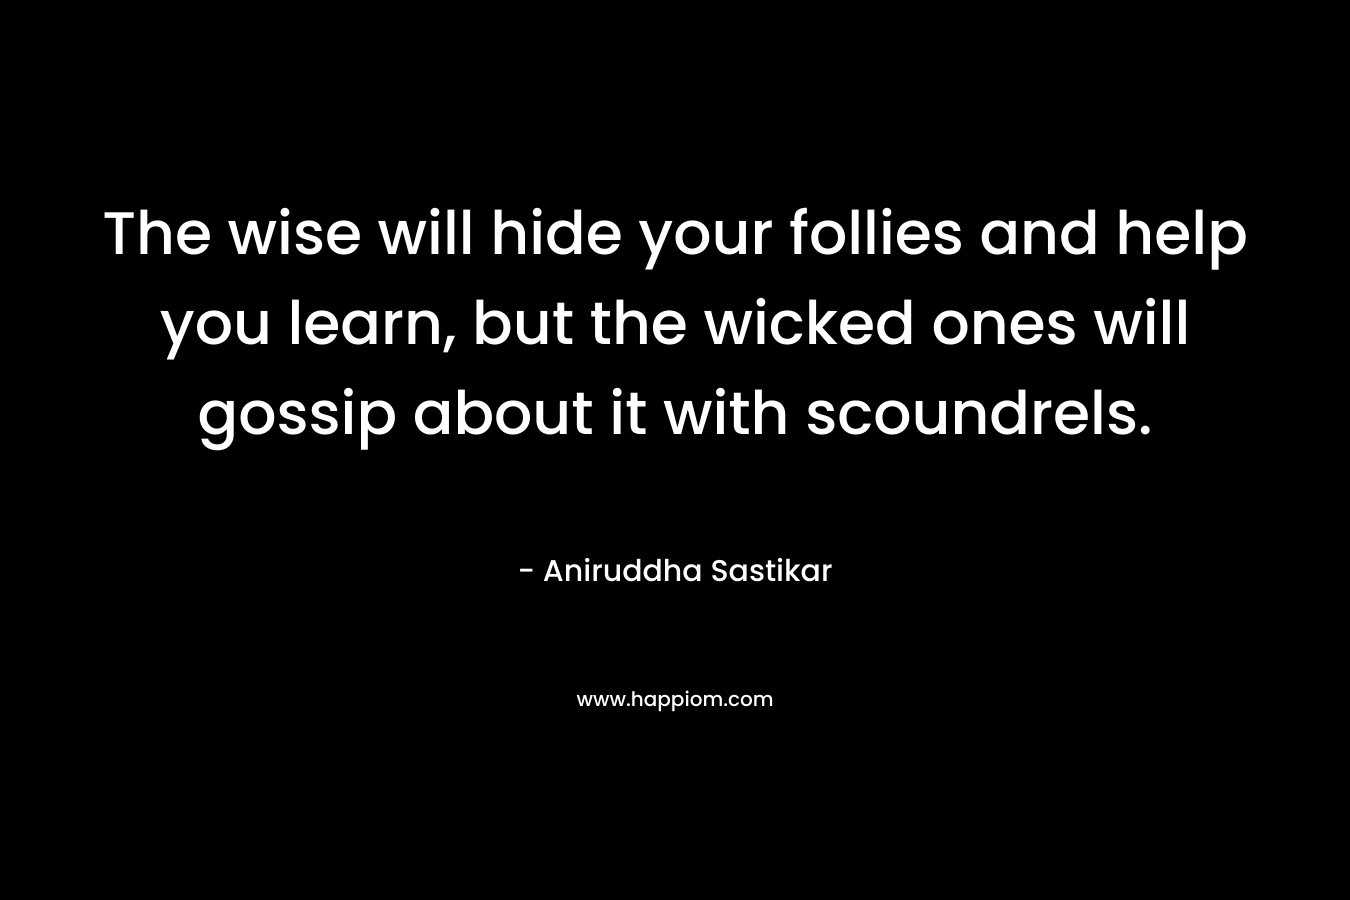 The wise will hide your follies and help you learn, but the wicked ones will gossip about it with scoundrels.